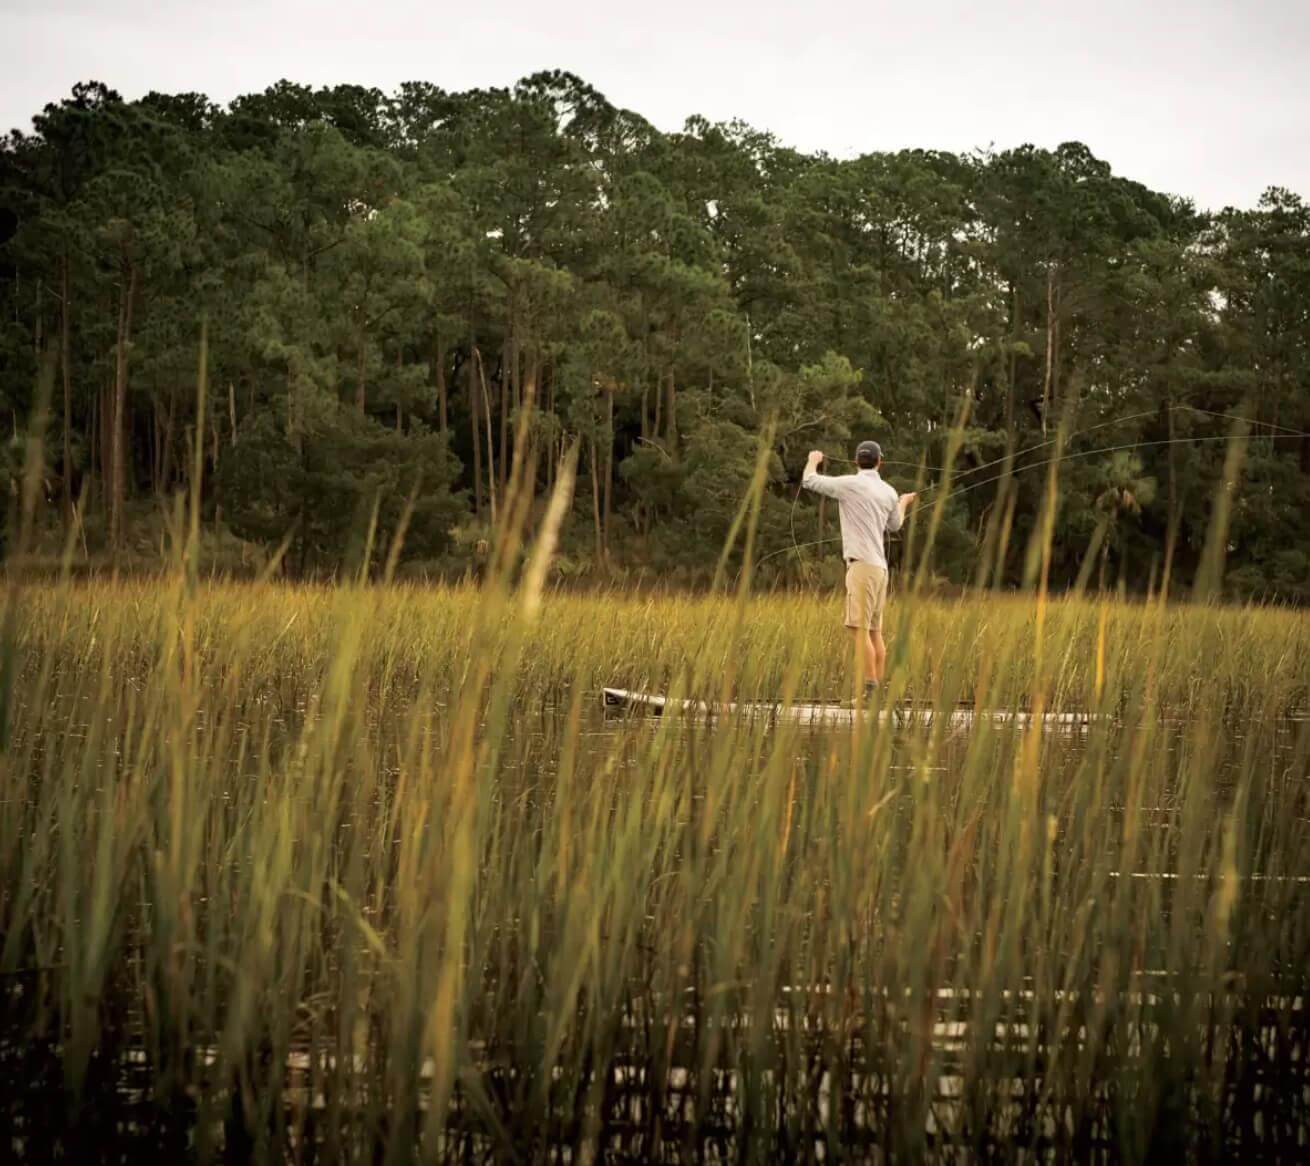 5 Underrated Fly Fishing Spots in South Carolina - Palmetto Bluff